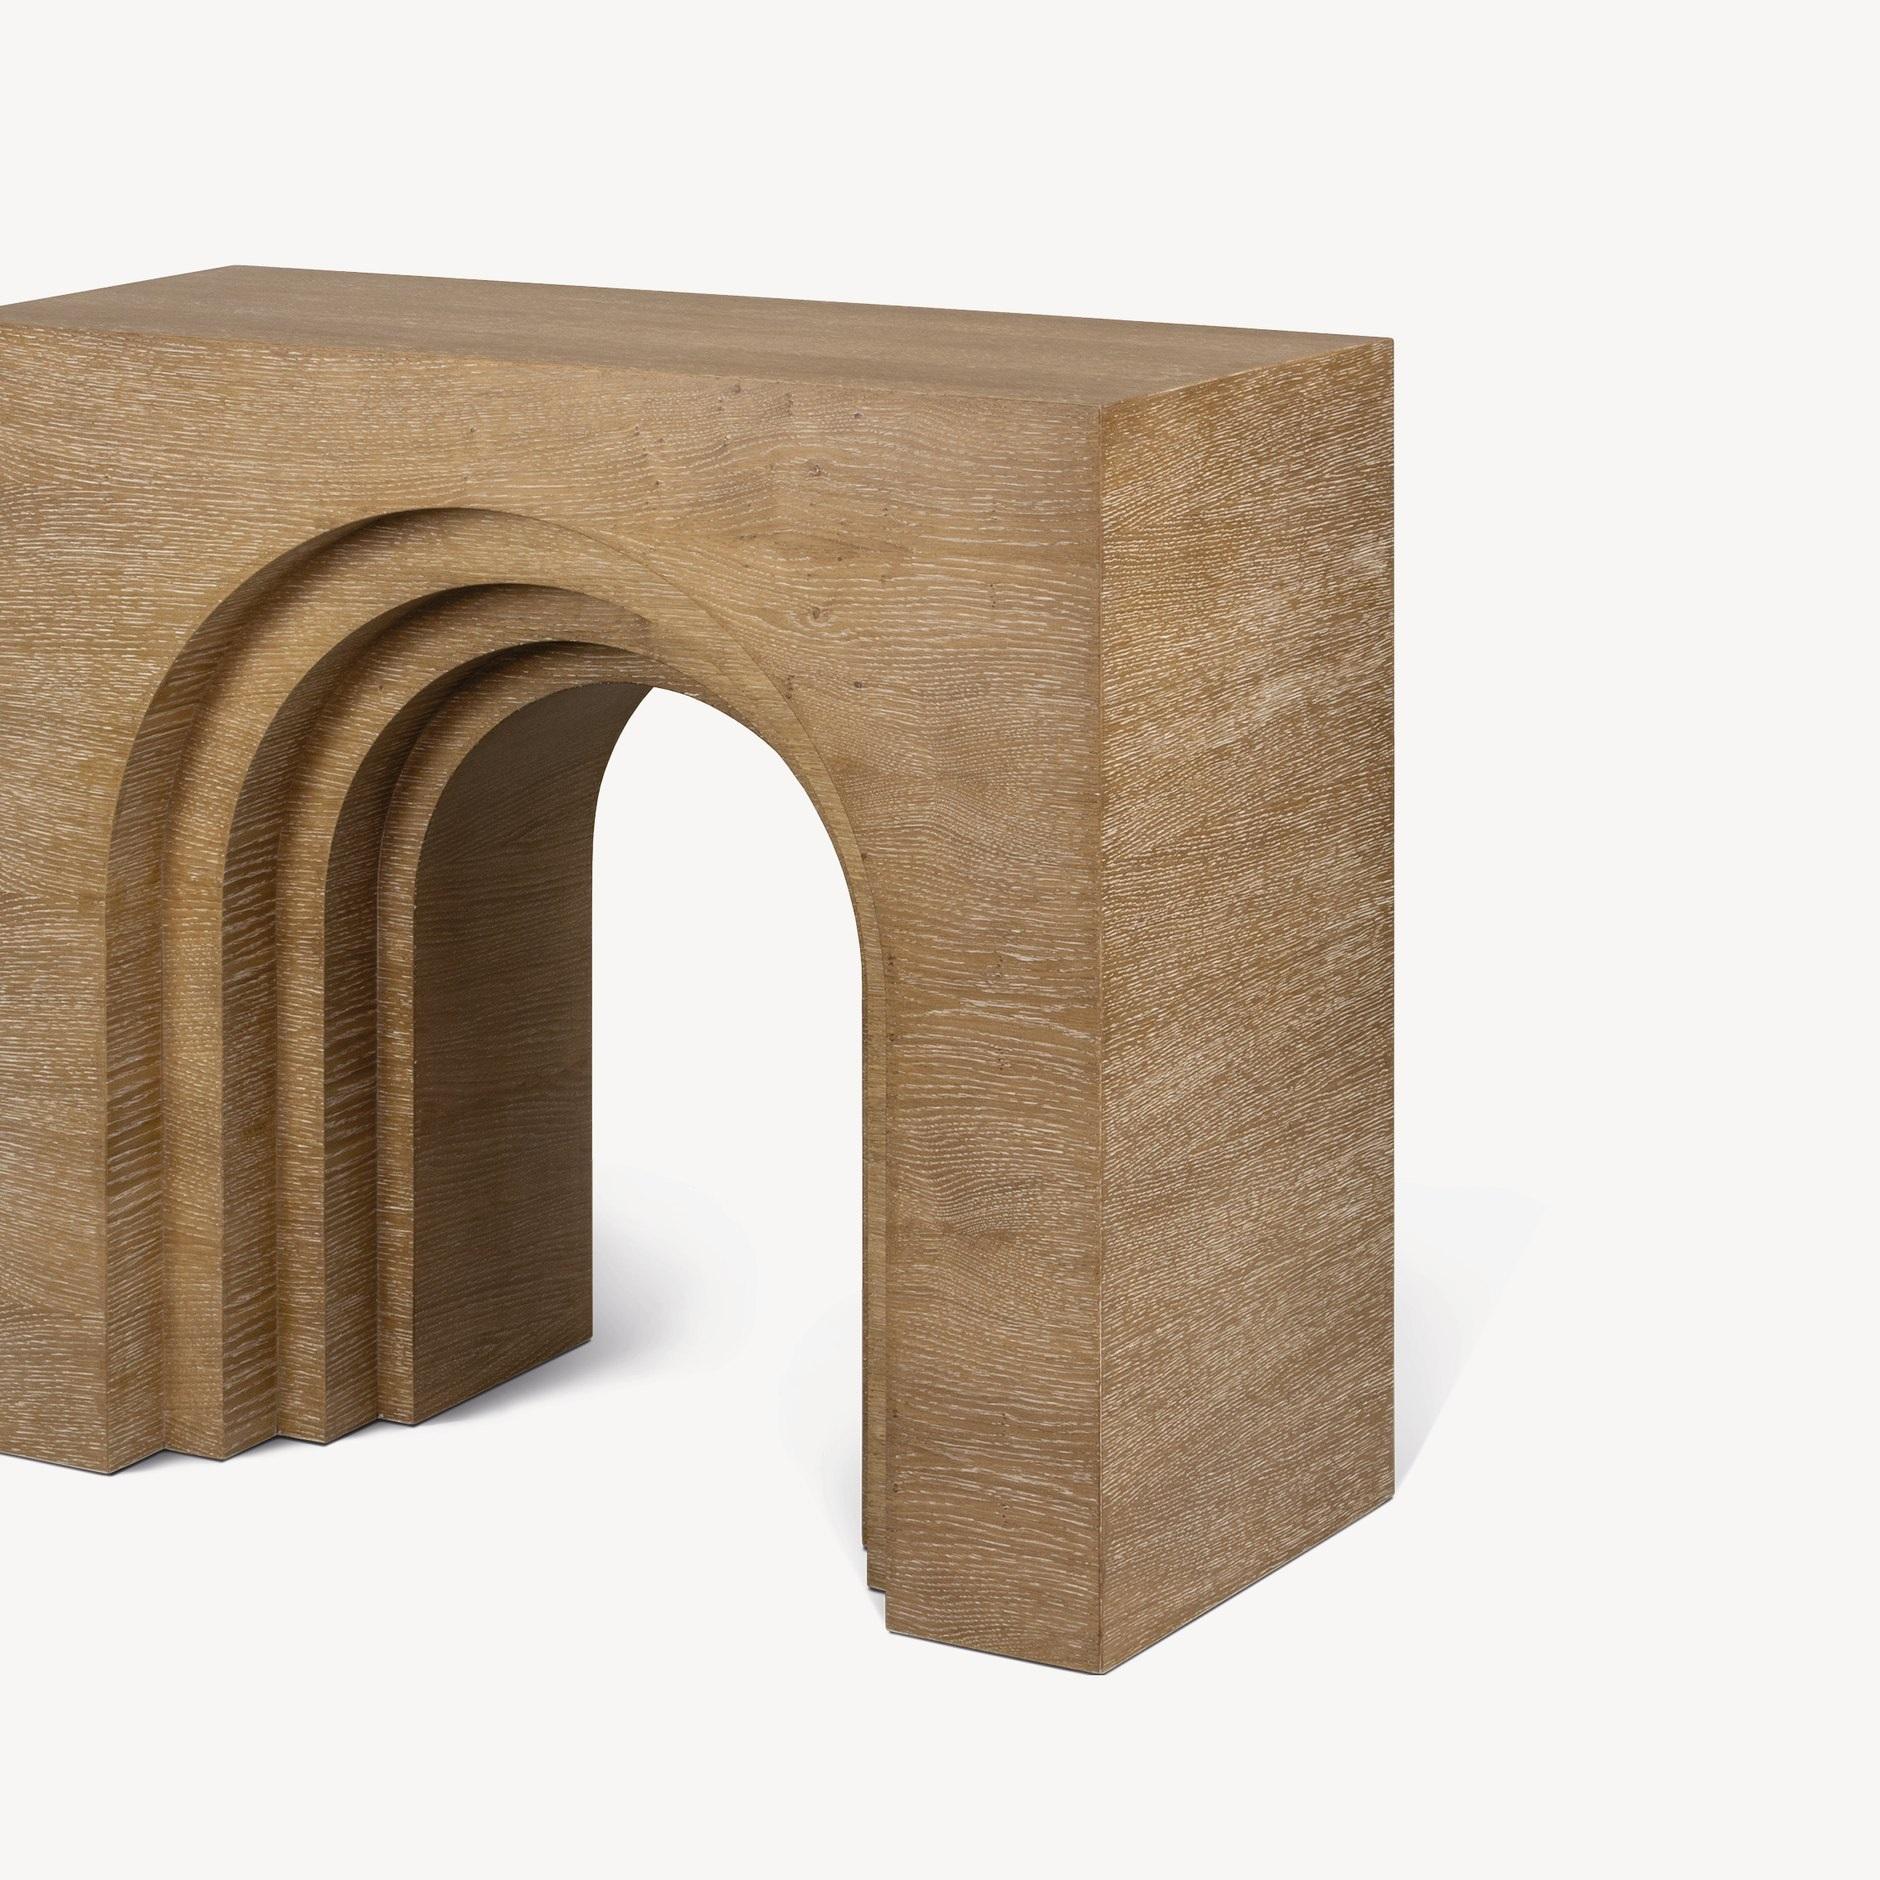 This console is made of limed oak wood and has a distinctive, arched or bridge-like shape. The console table has a smooth, polished finish and sits on two slender legs. It is characterized by its organic shapes and use of natural materials. The